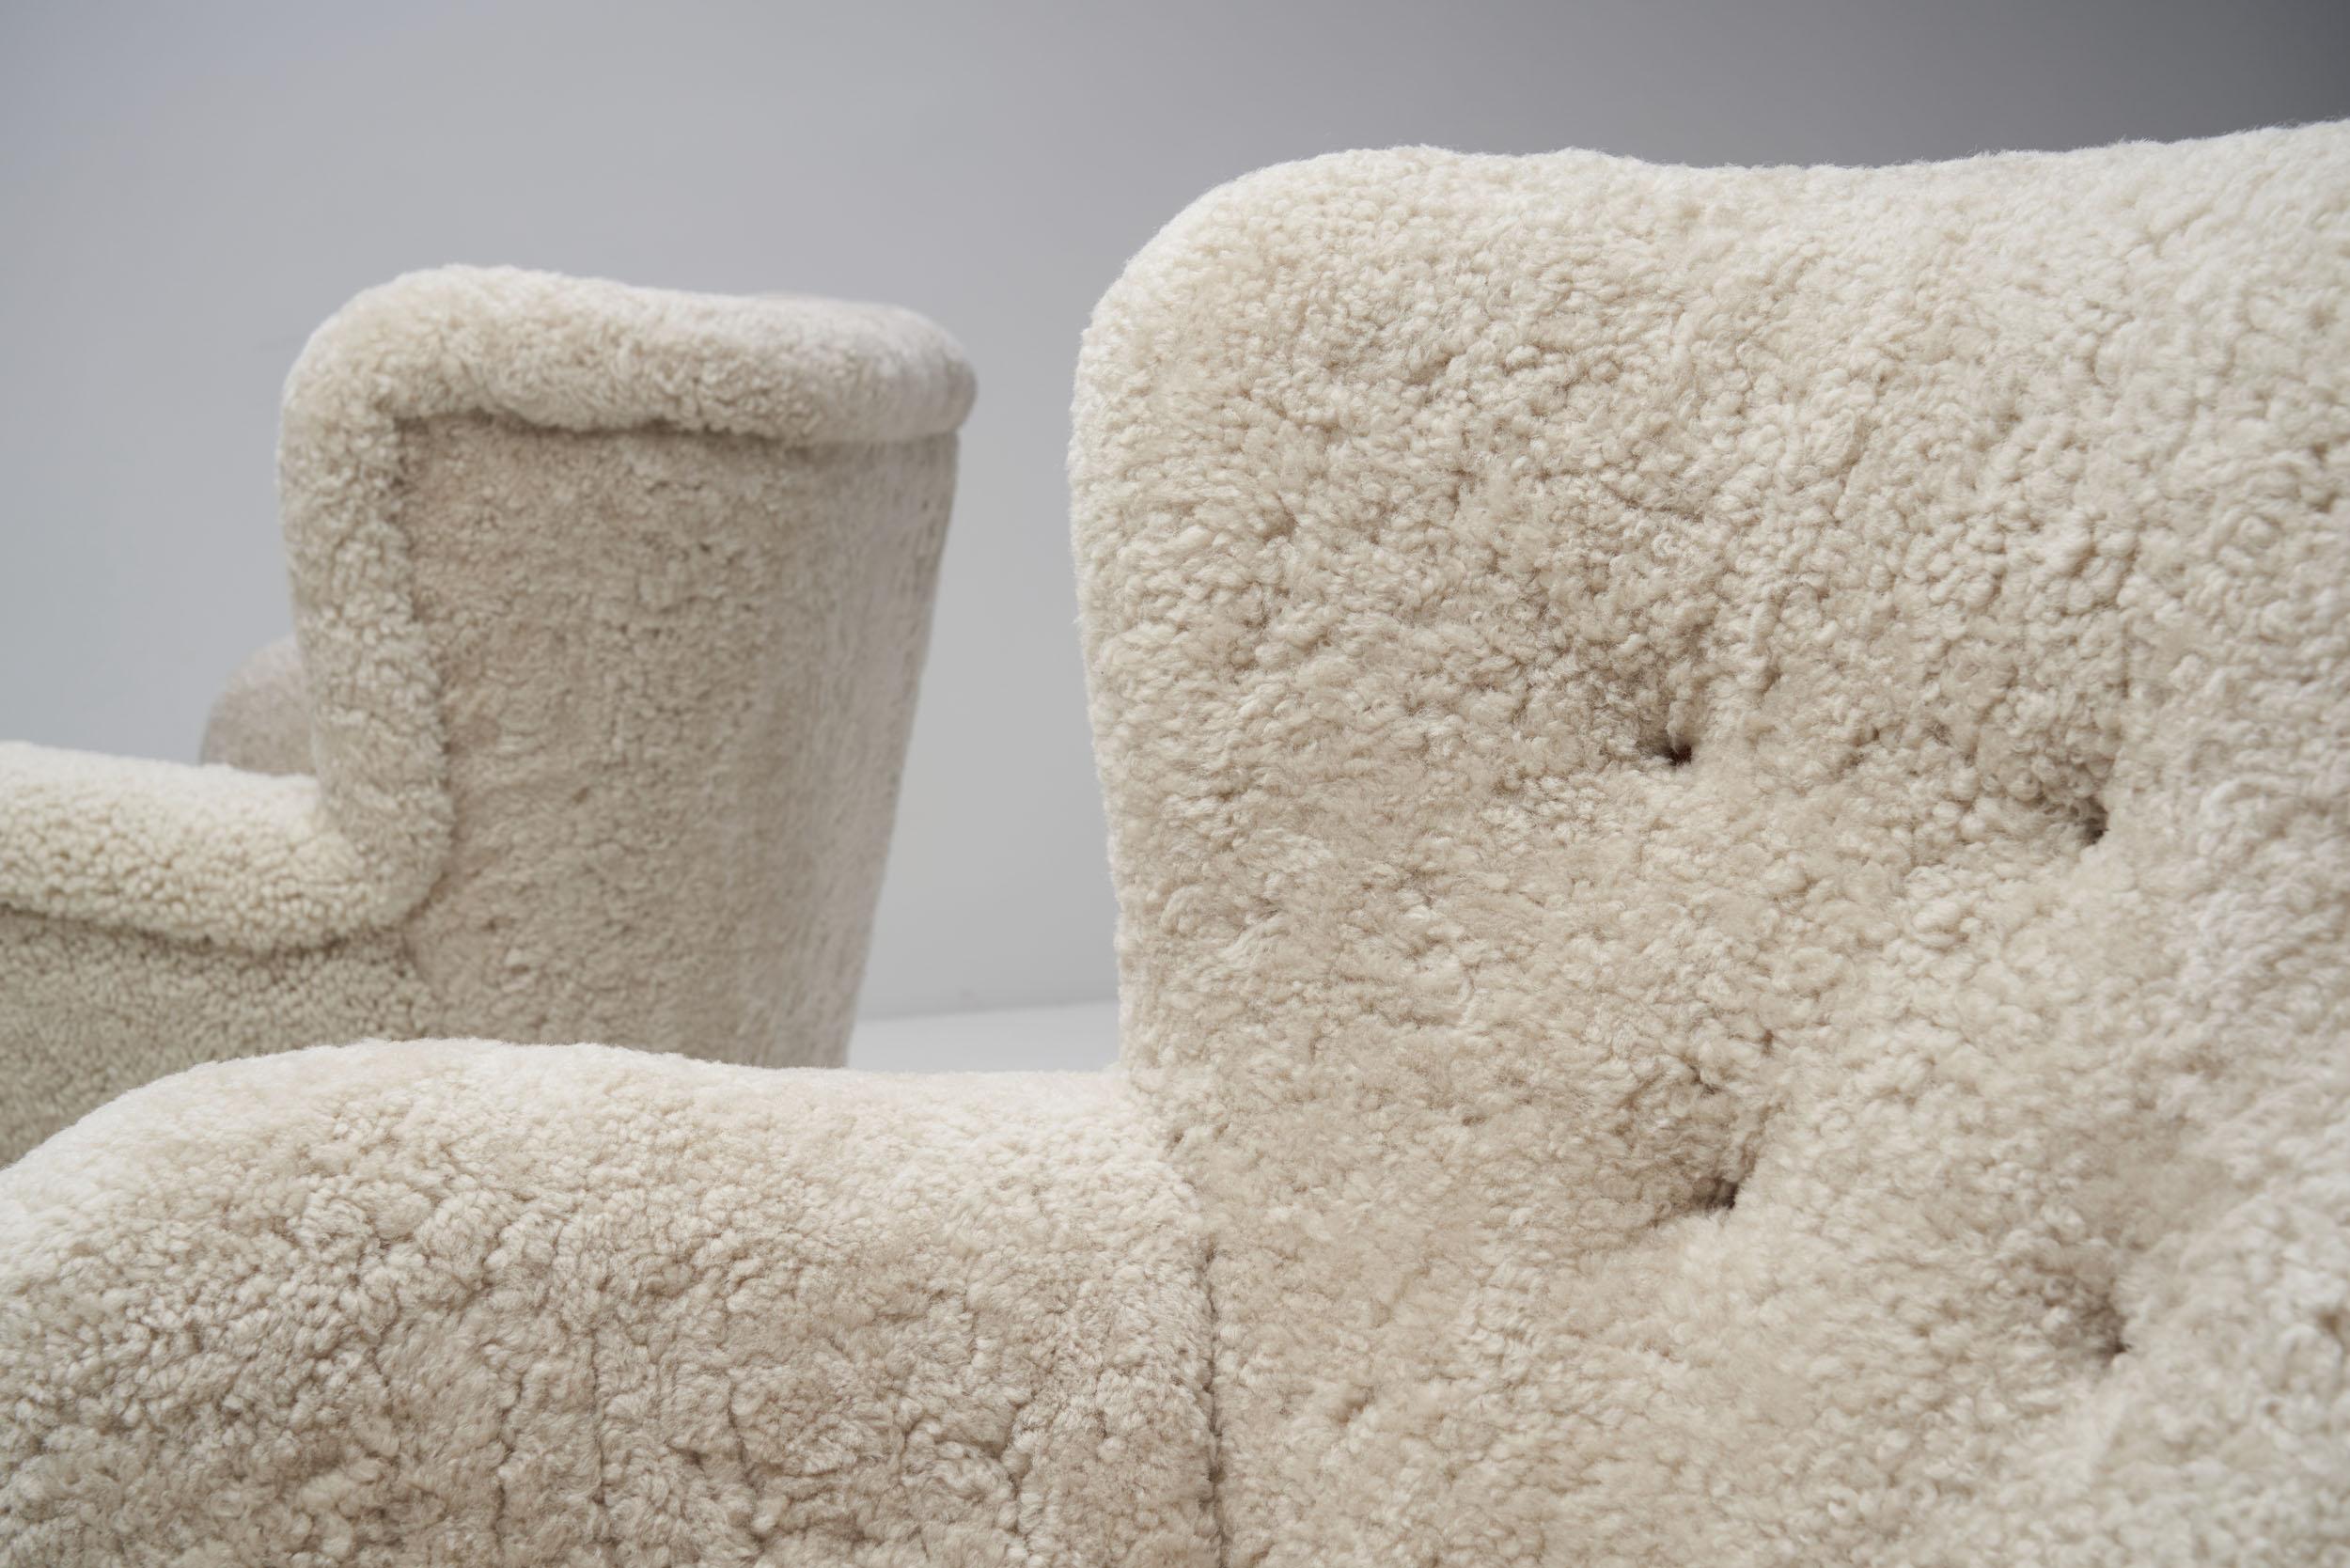 Pair of “Laila” Armchairs in Sheepskin by Ilmari Lappalainen, Finland 1948 For Sale 3